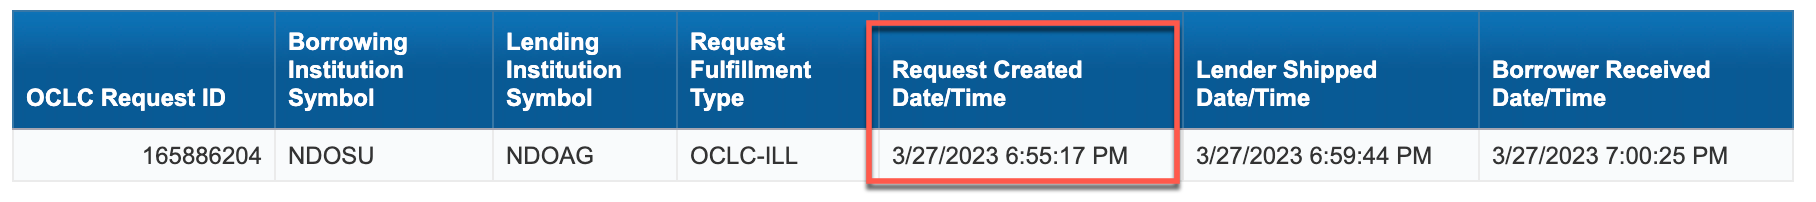 Request Created Date 2023-04-05_09-47-58.png